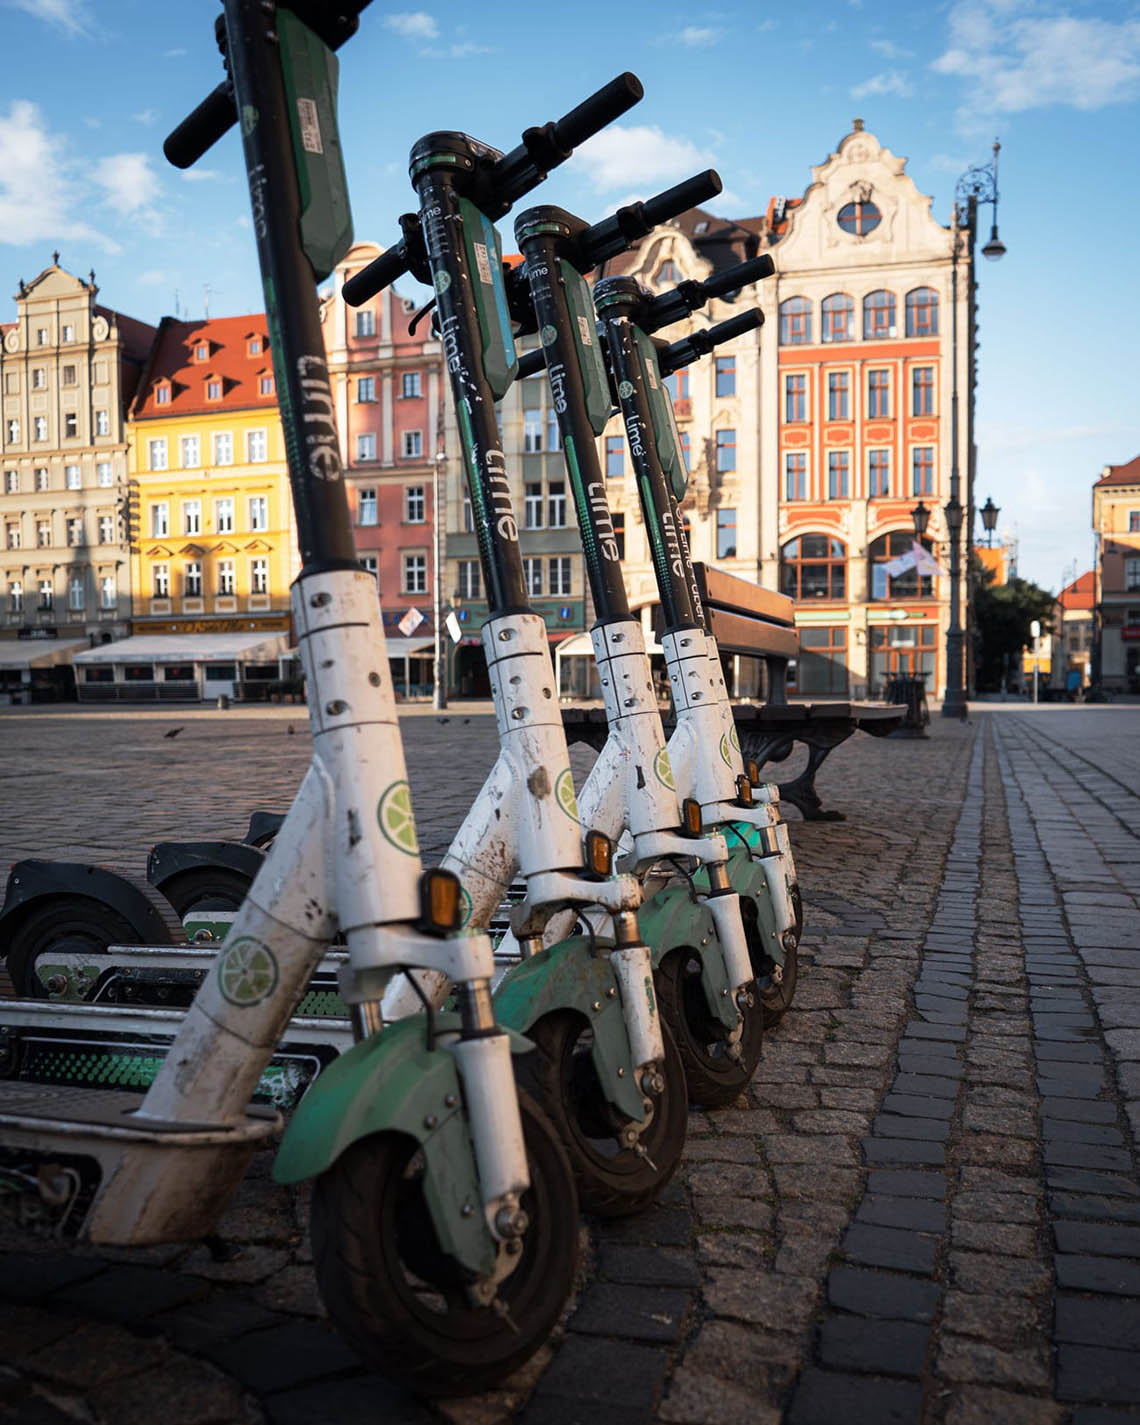 Wroclaw for Digital Nomads: Lime eScooters in Market Square